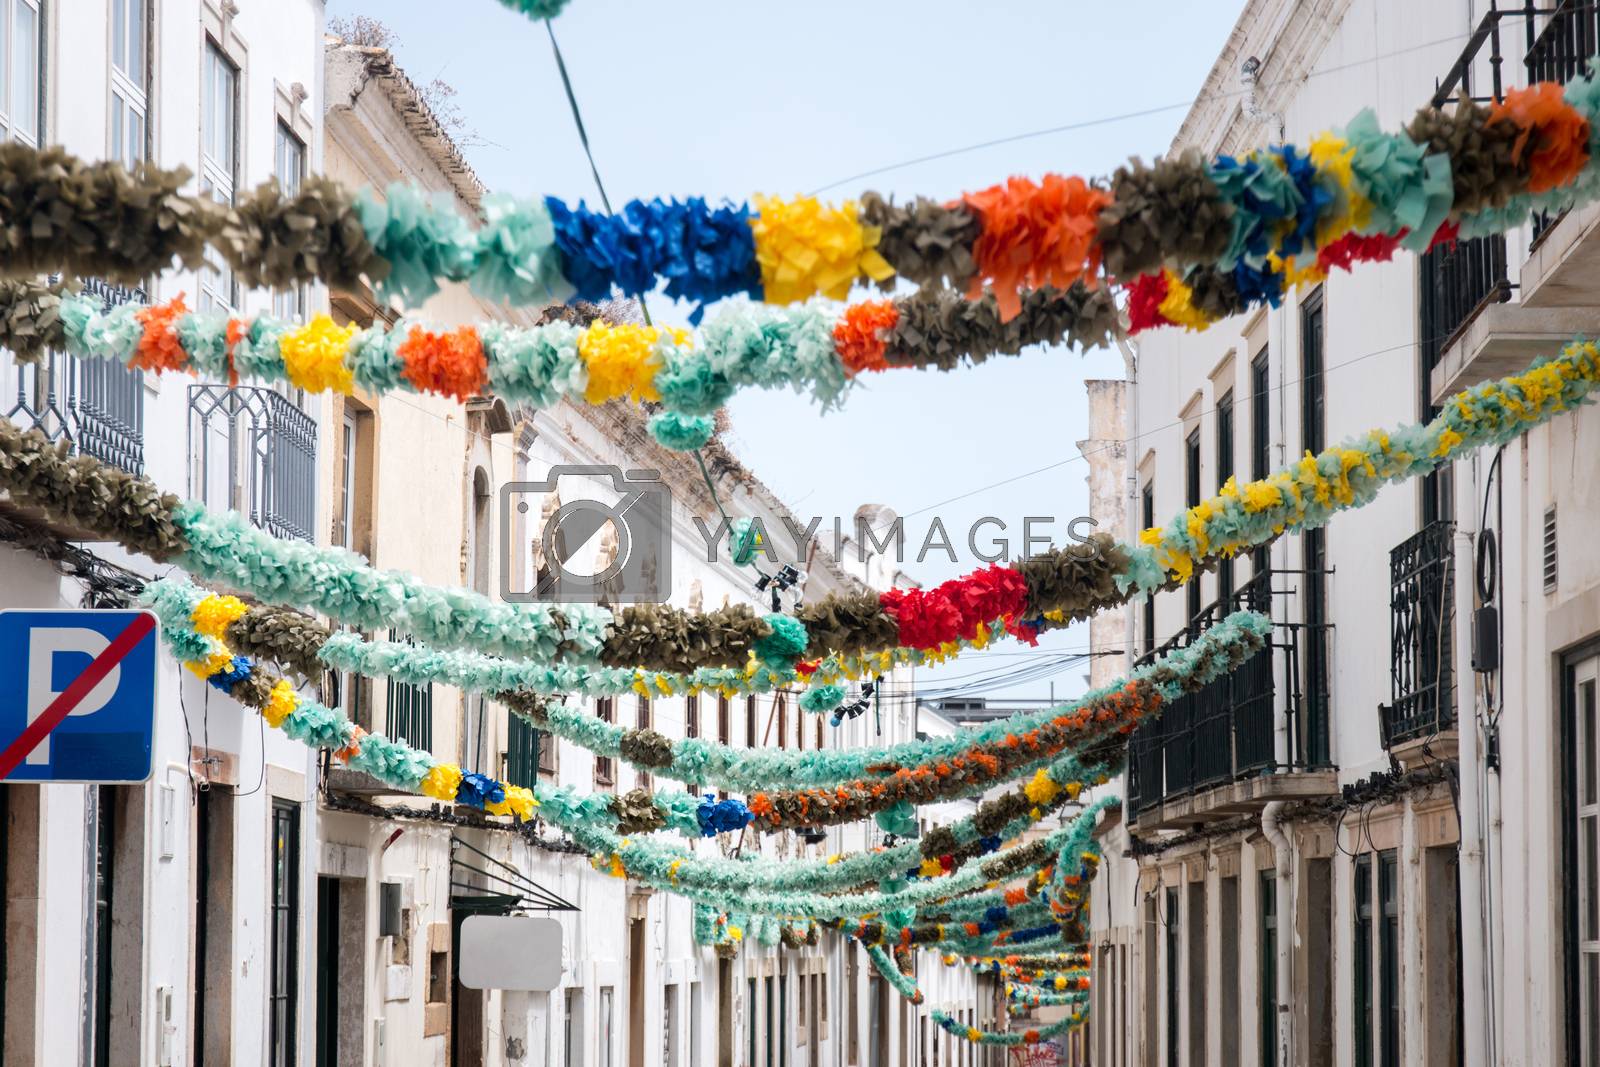 Royalty free image of Popular Saints decoration in a street by membio